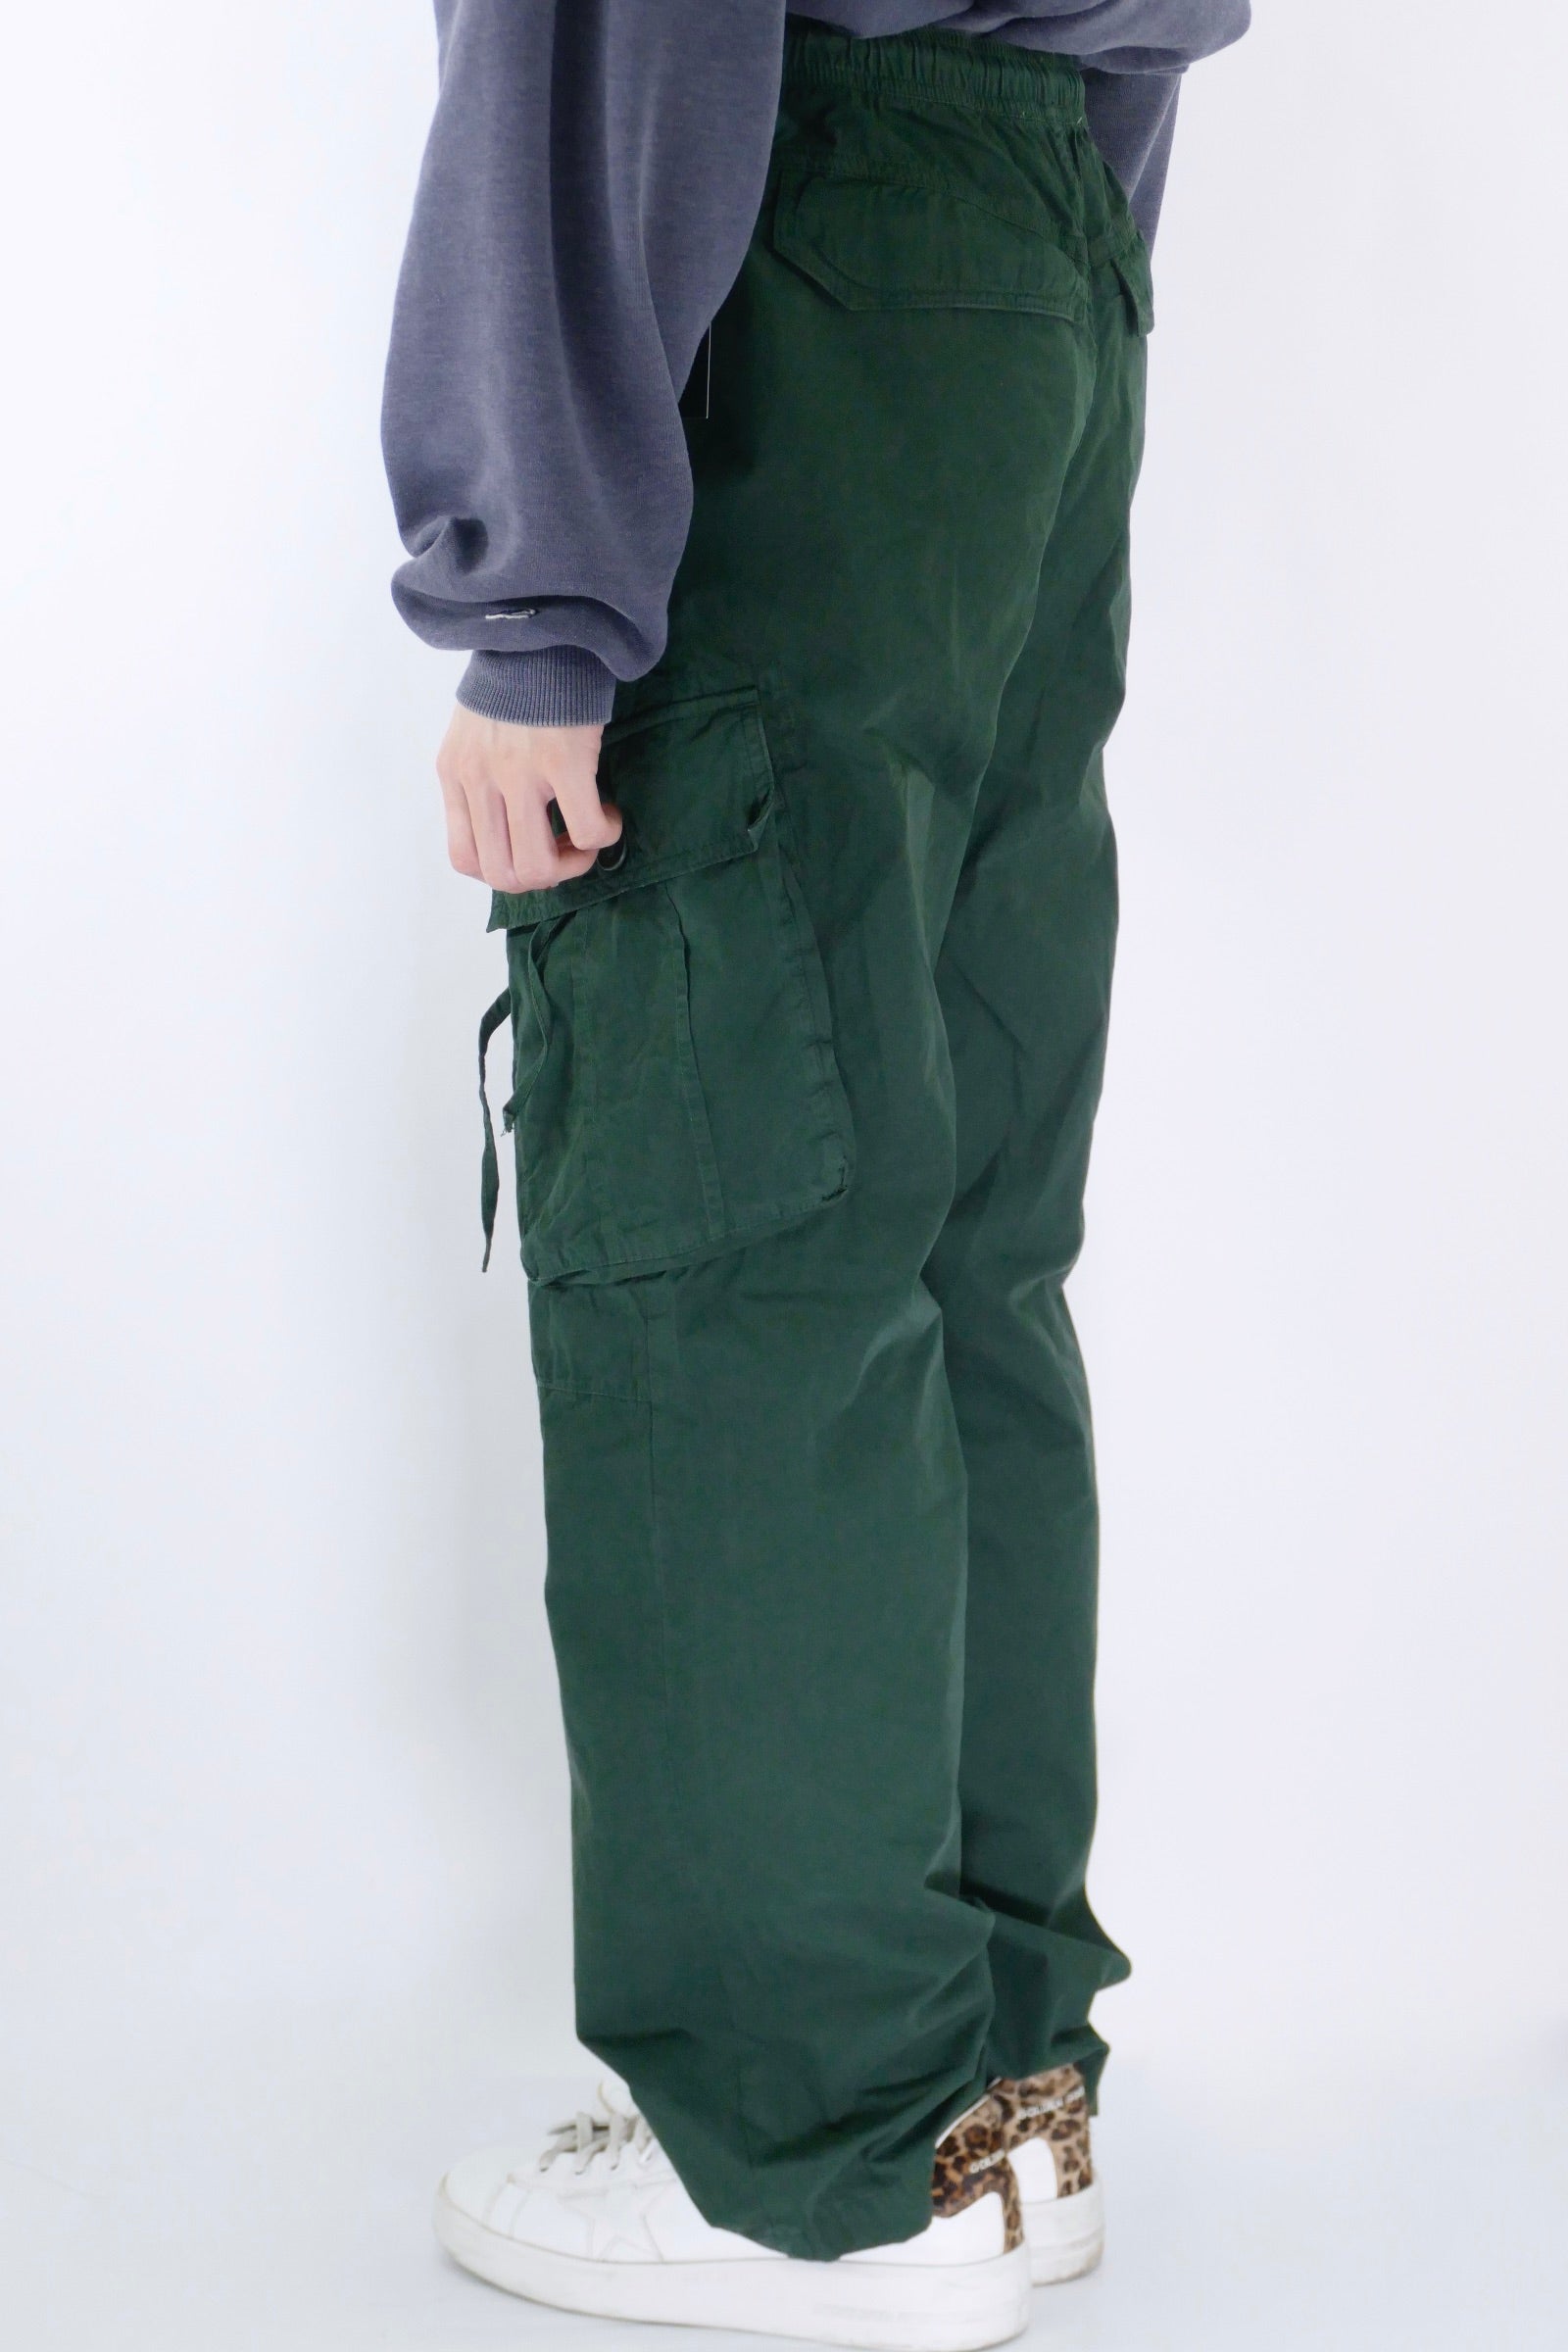 WOOD WOOD Stanley Cargo Pants - Forest Green - Due West